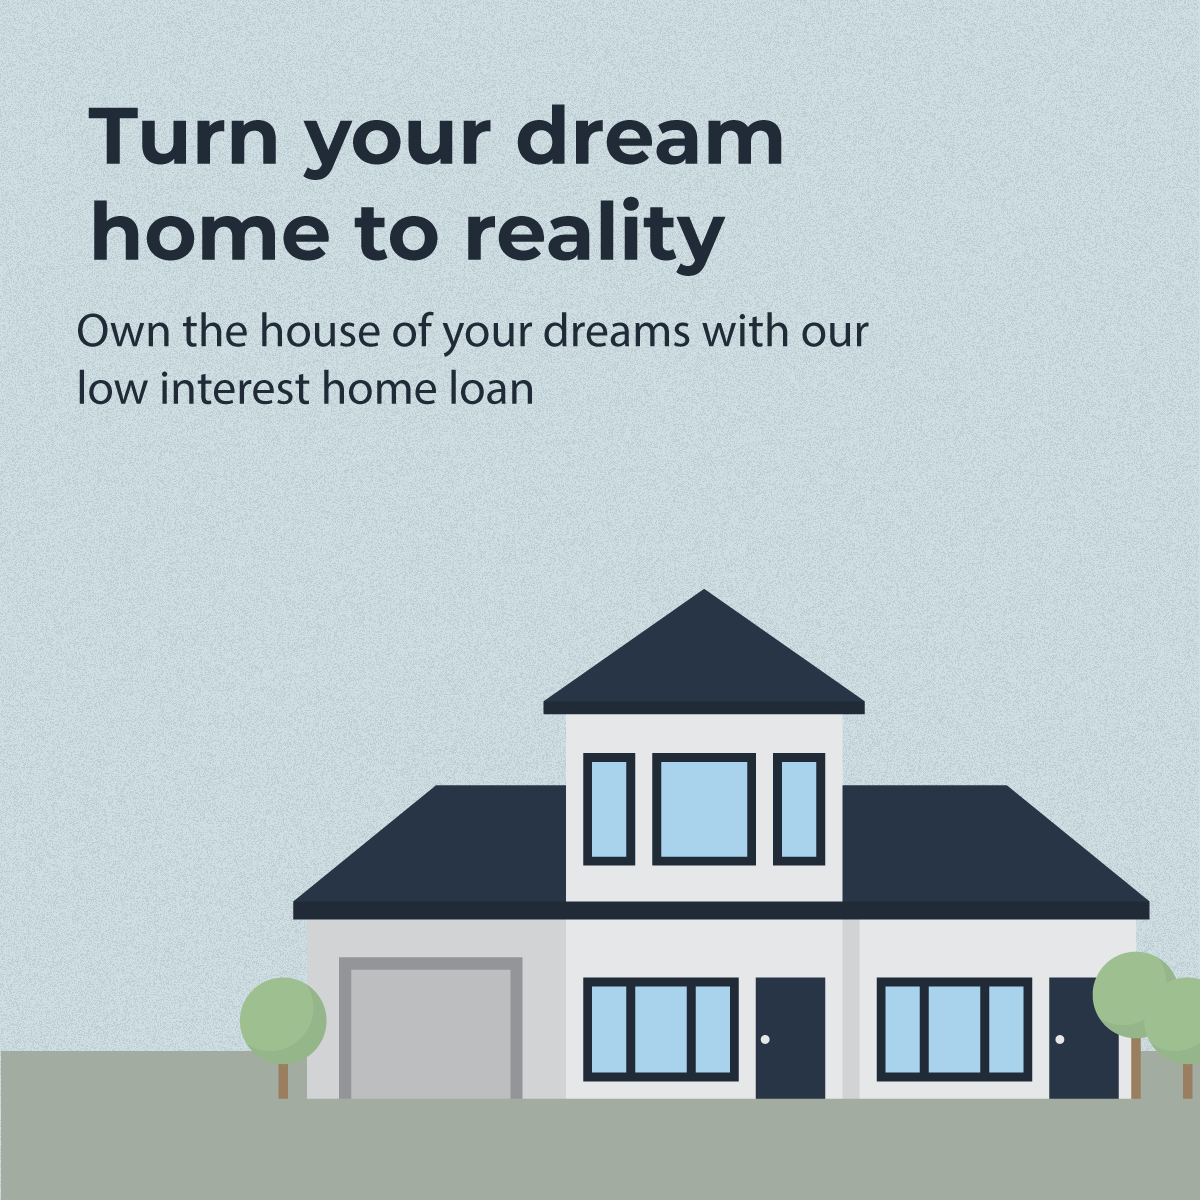 security bank home loan application - what is the security bank home loan